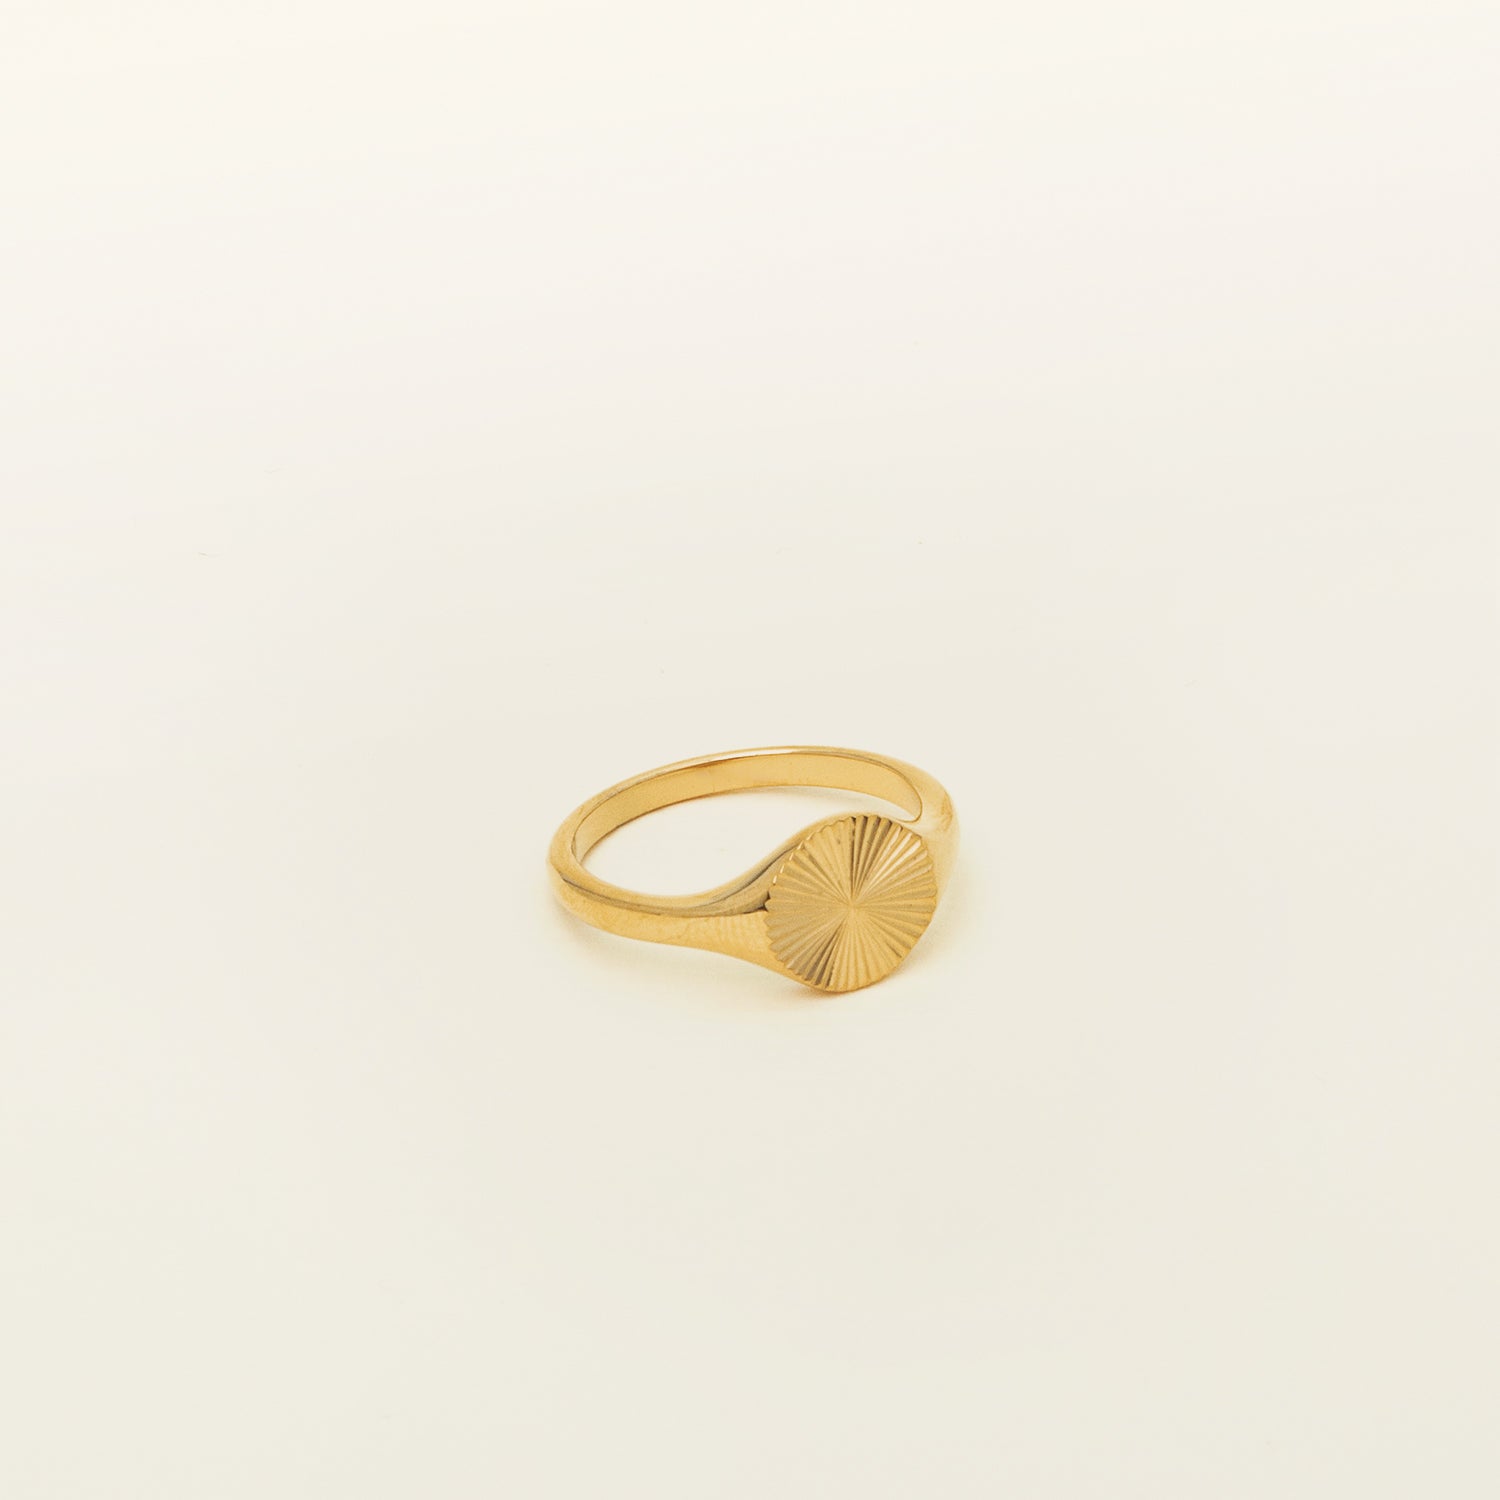 Image of the Sunbeam Ring is crafted out of 18K Gold Plated Stainless Steel, providing a non-tarnishing and water-resistant material. Please note, this ring is sold as a single item.